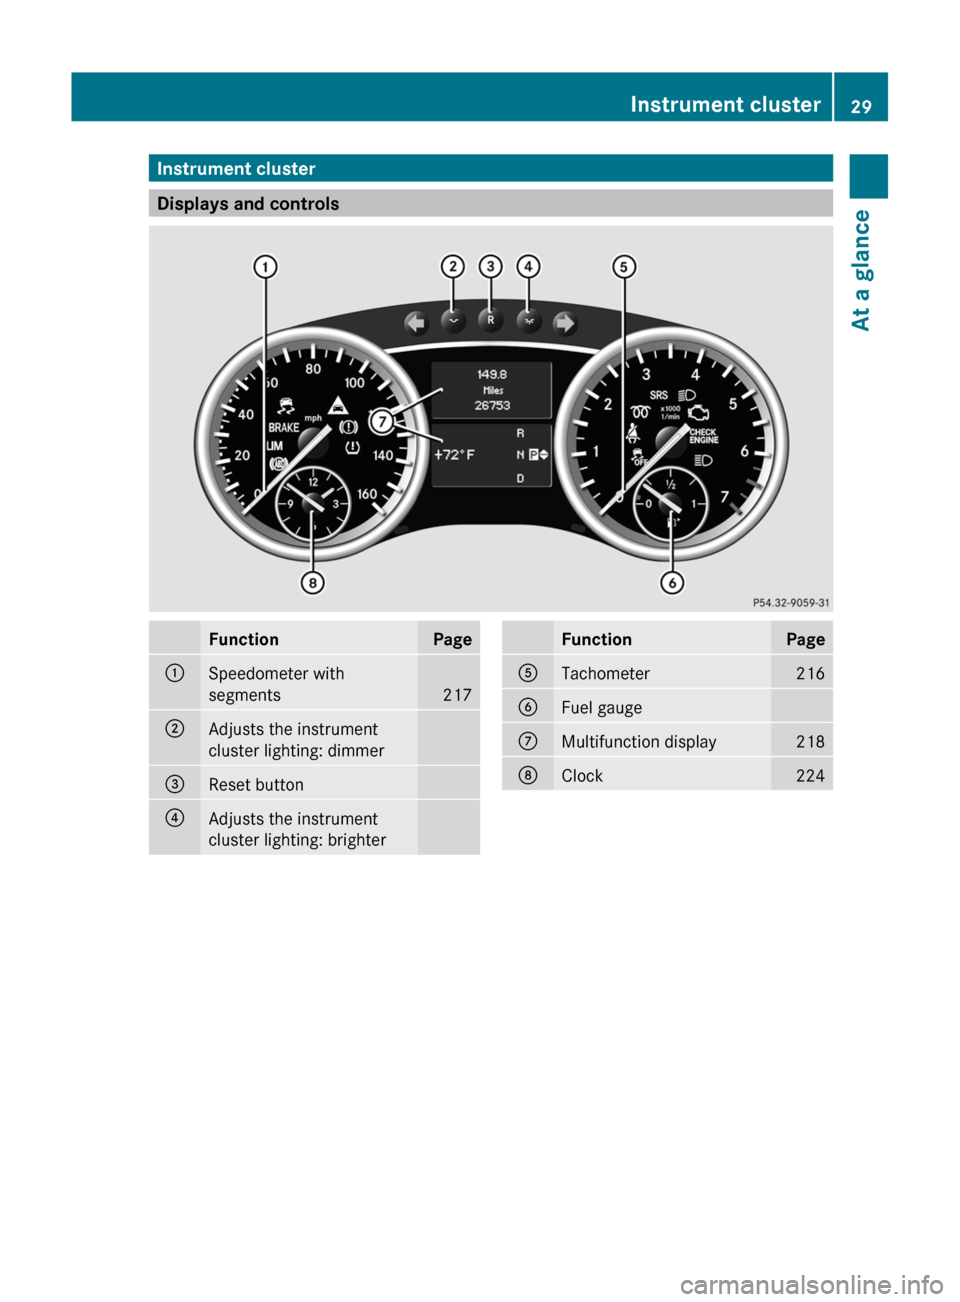 MERCEDES-BENZ GL-Class 2012 X164 Owners Guide Instrument cluster
Displays and controls
FunctionPage:Speedometer with
segments
217
;Adjusts the instrument
cluster lighting: dimmer=Reset button?Adjusts the instrument
cluster lighting: brighterFunct